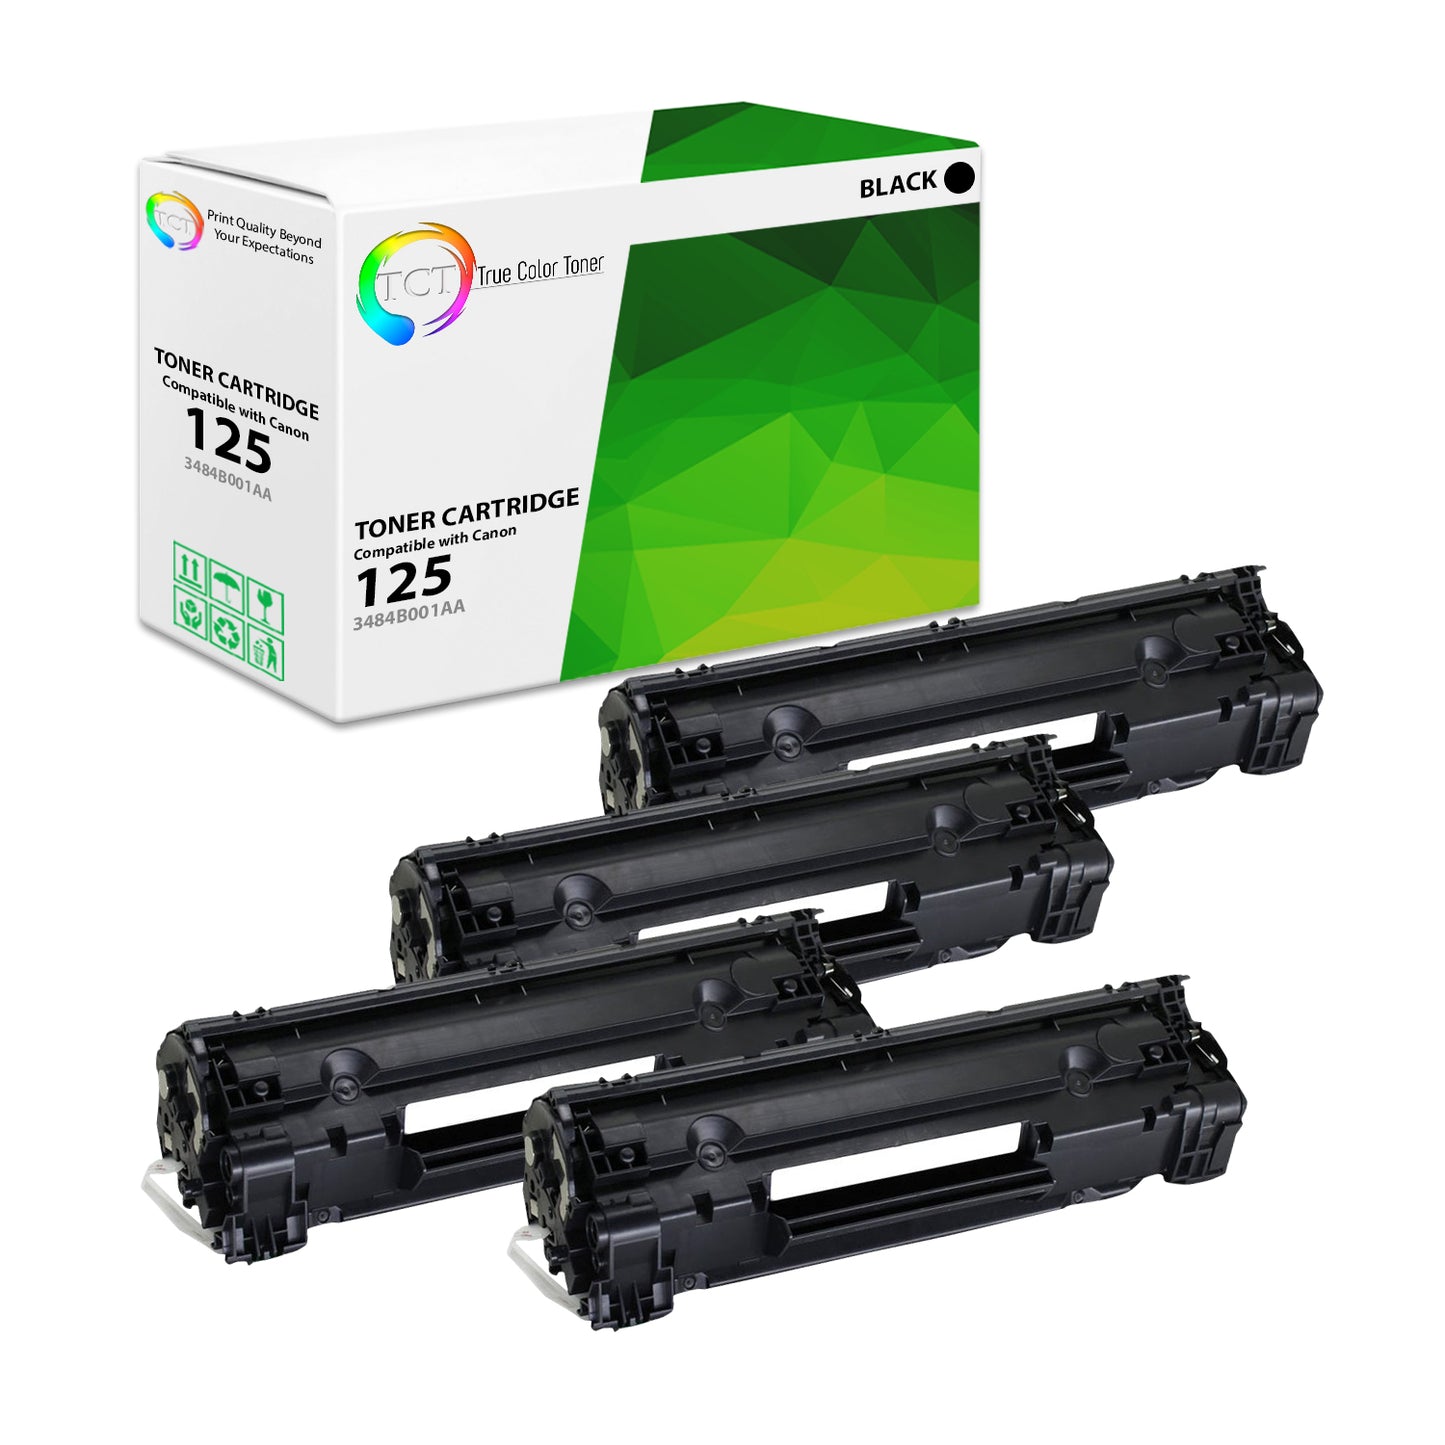 TCT Compatible Toner Cartridge Replacement for the Canon 125 Series - 4 Pack Black